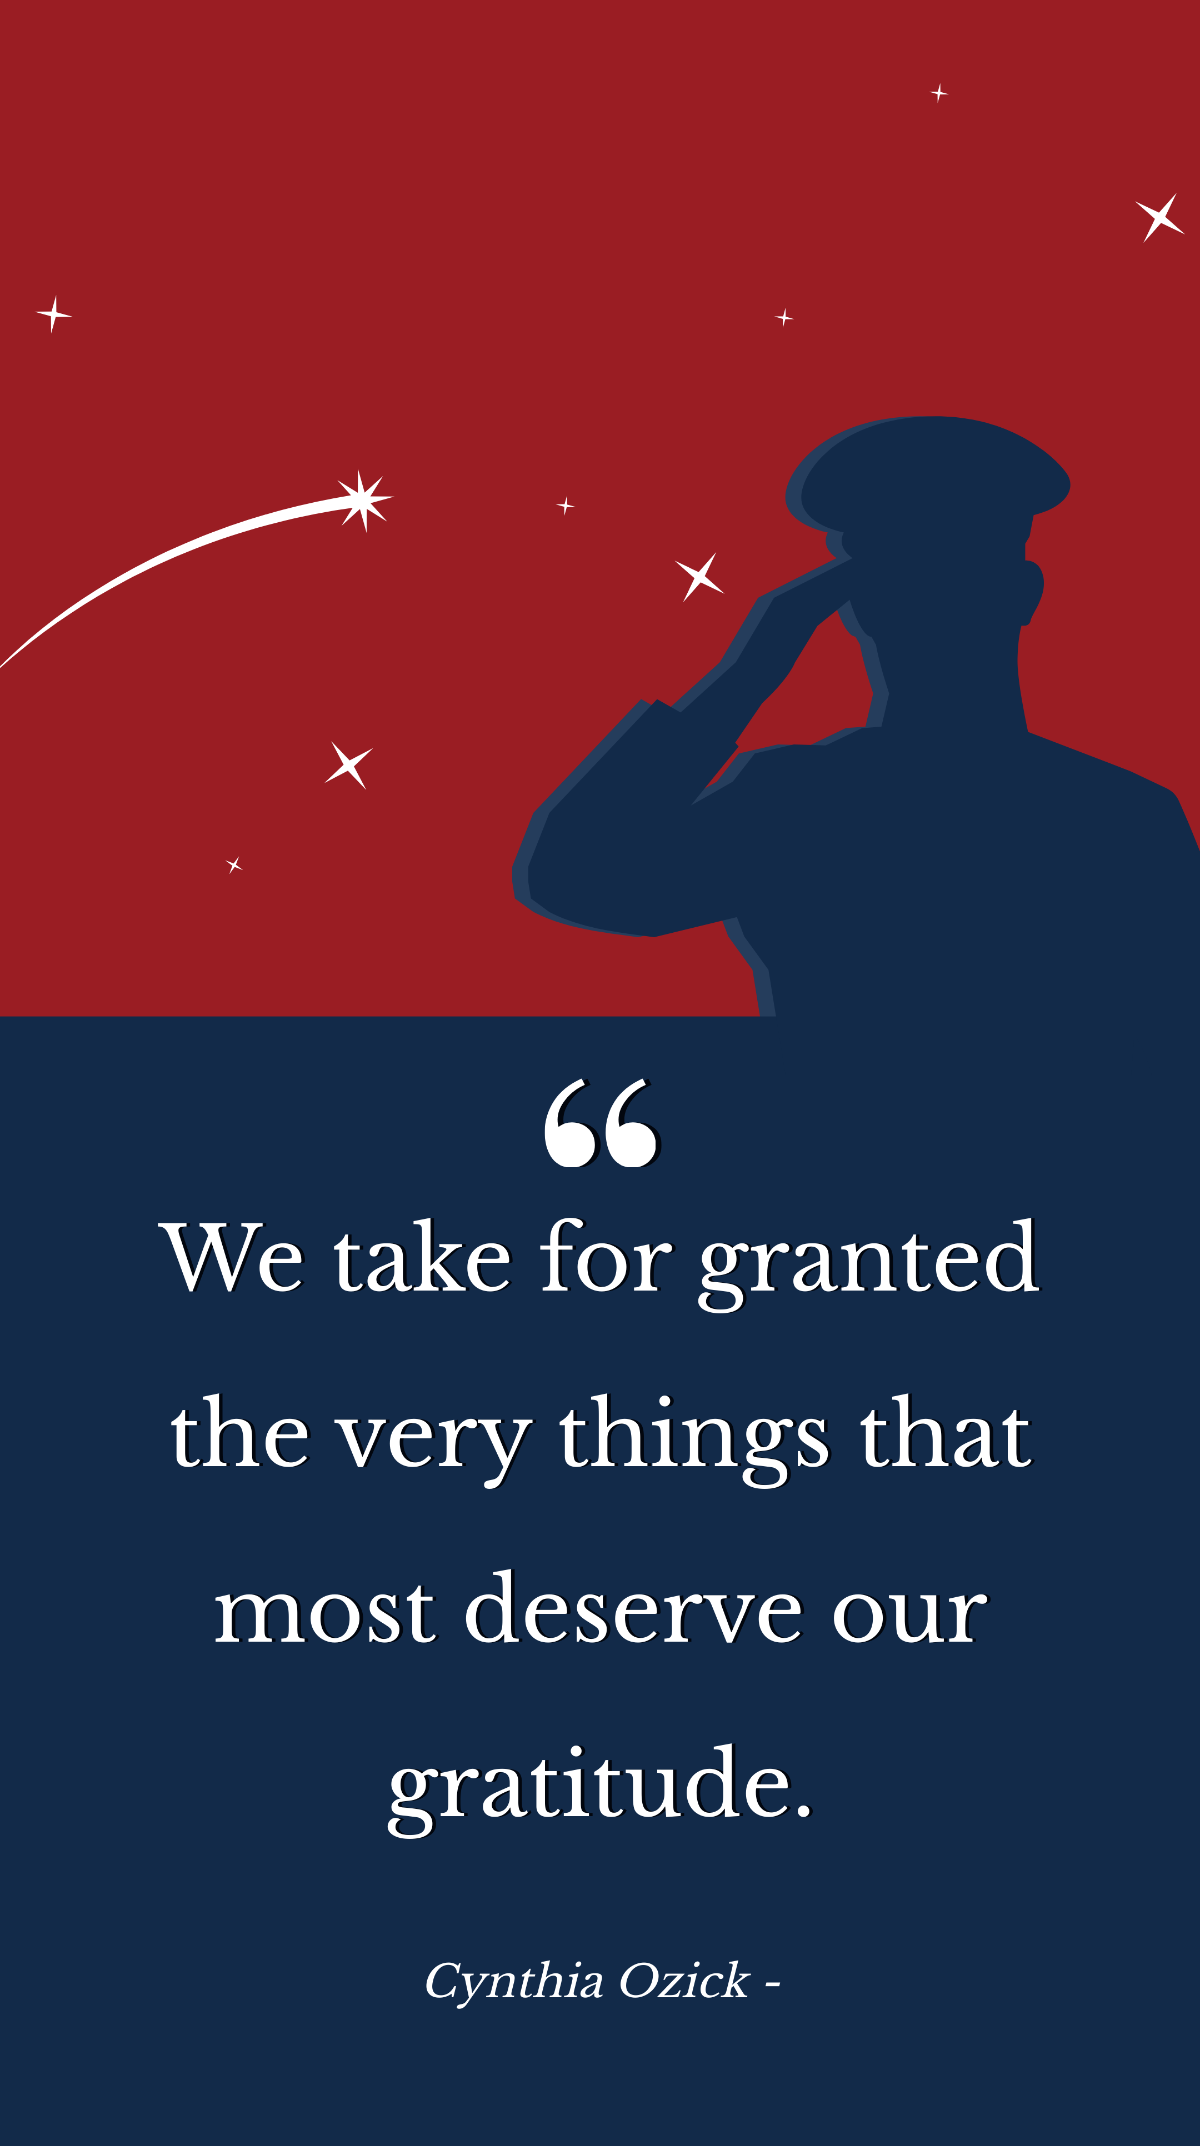 Cynthia Ozick - We take for granted the very things that most deserve our gratitude.